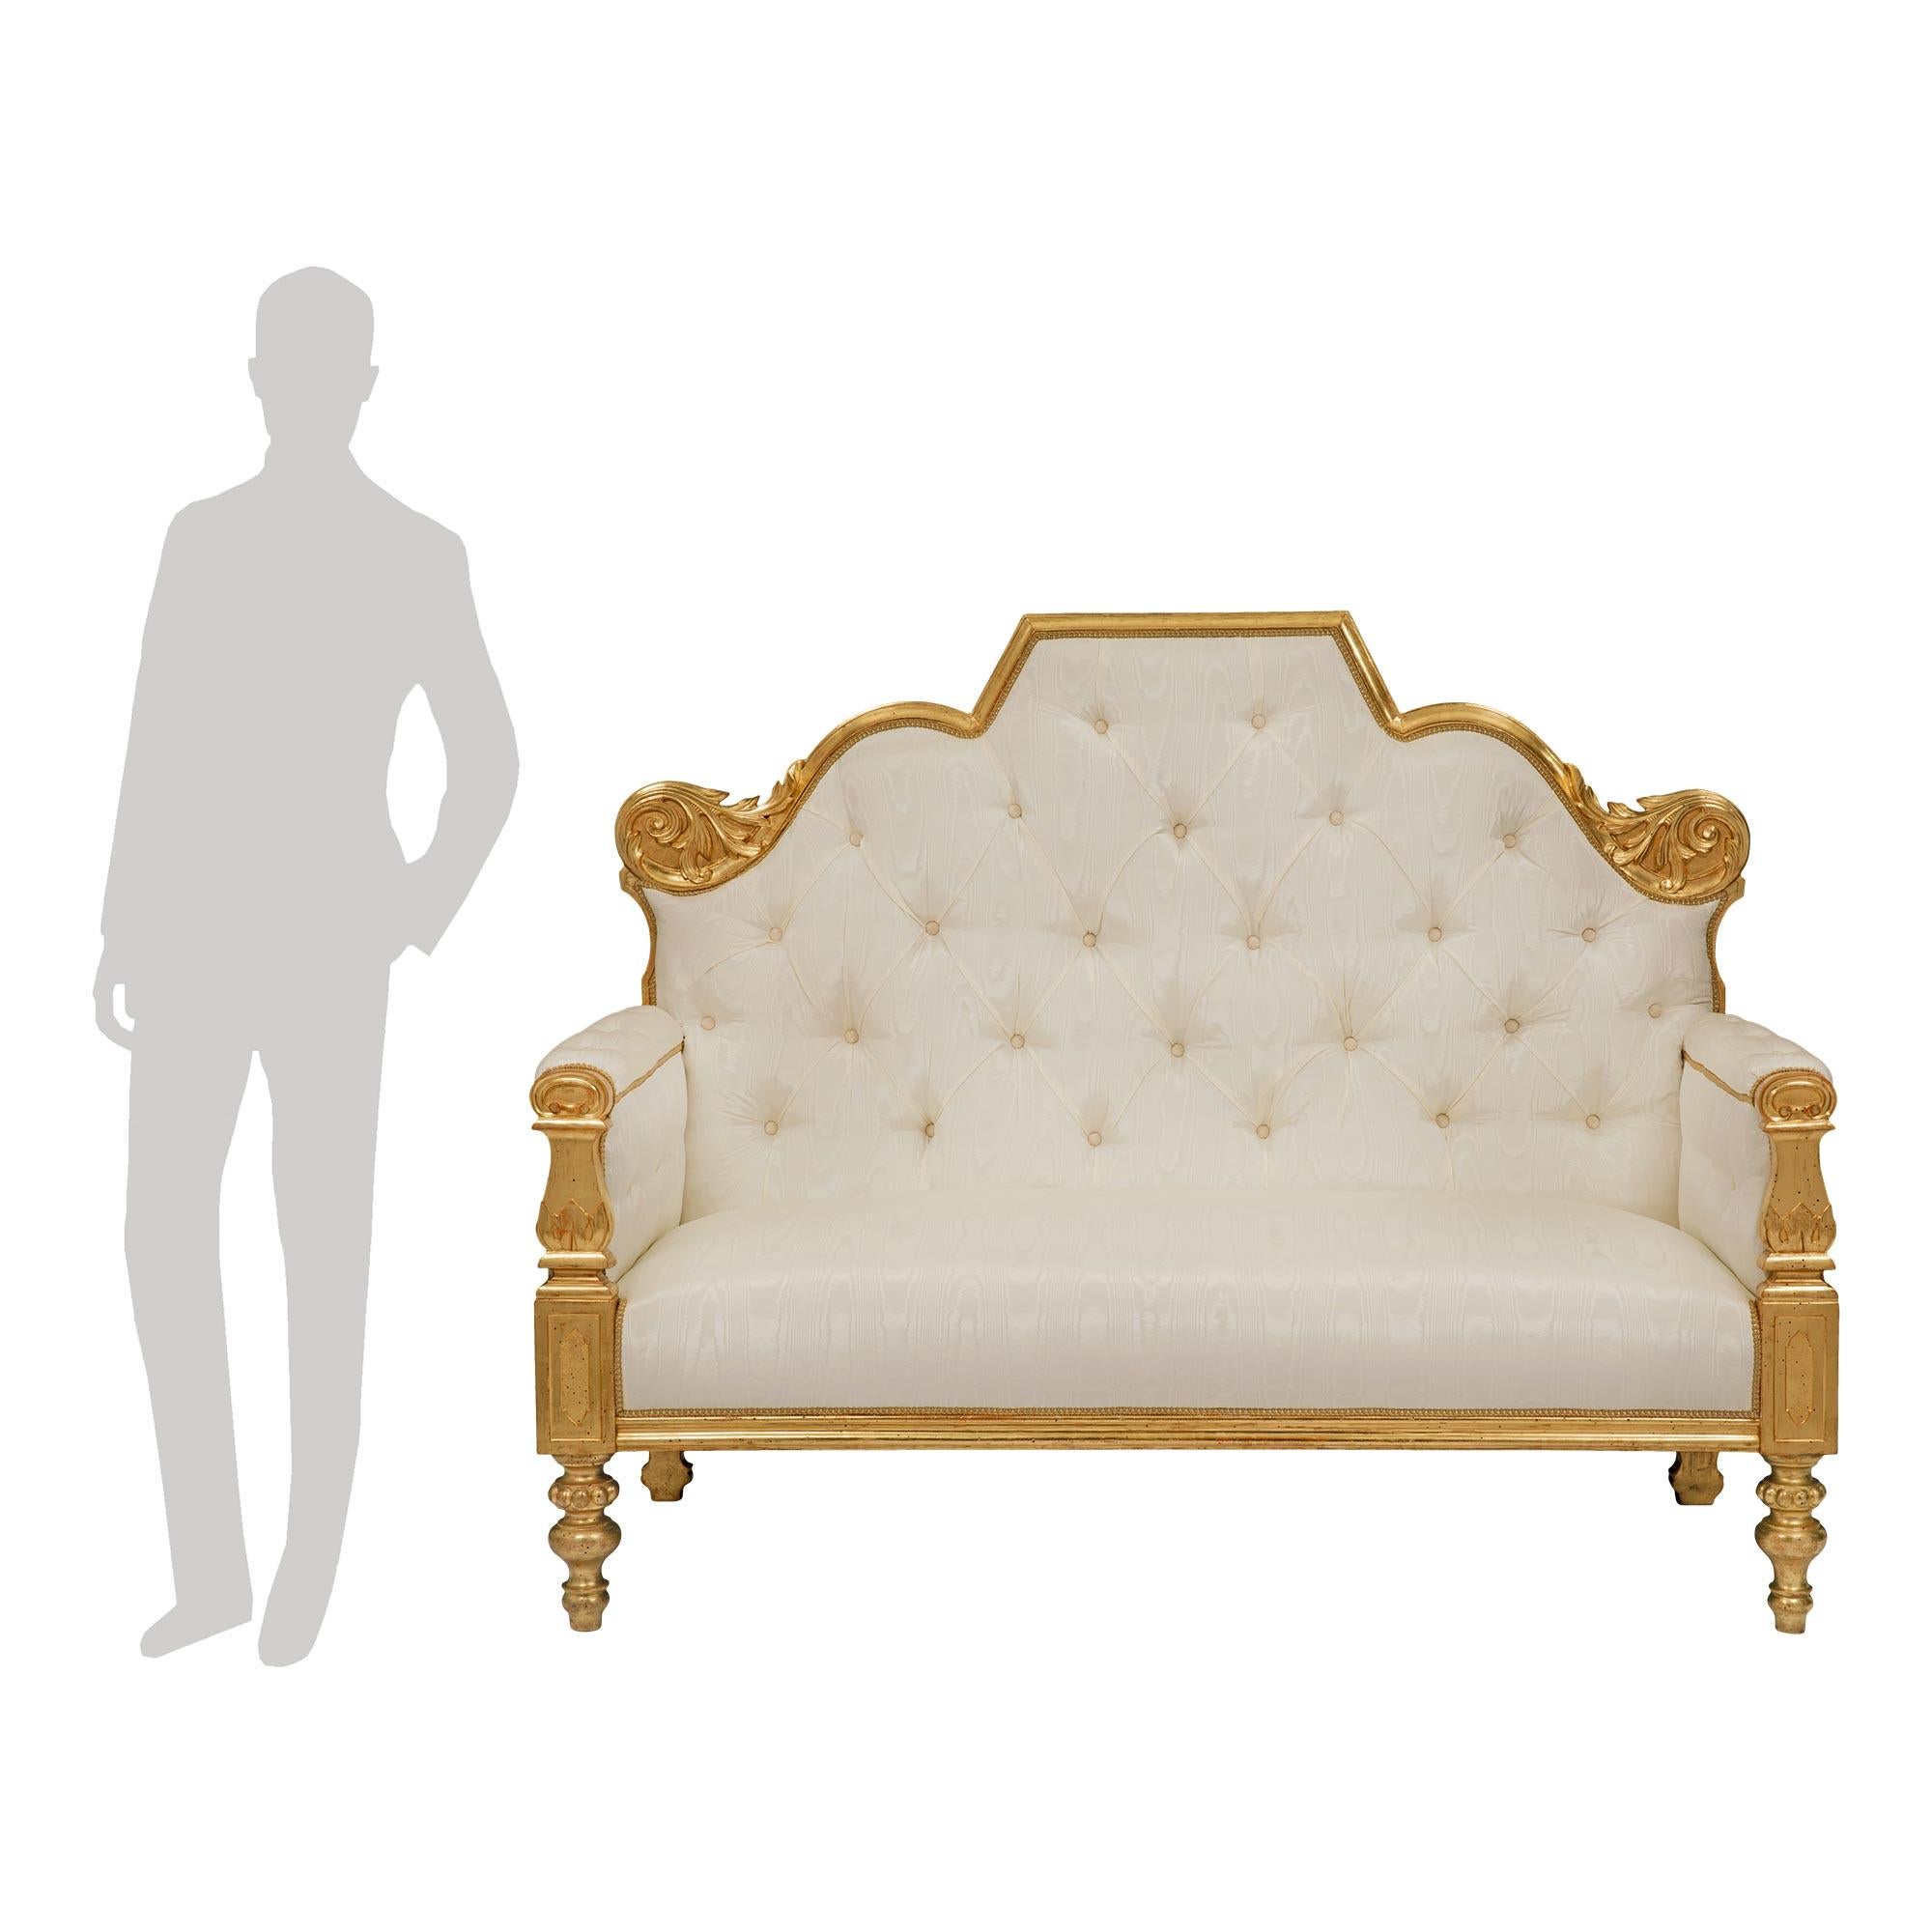 A striking and most elegant Italian 19th century giltwood settee. The settee is raised by fine topie shaped legs with a lovely beaded design below carved recessed block reserves. The straight frieze displays a mottled design while the cushioned arm